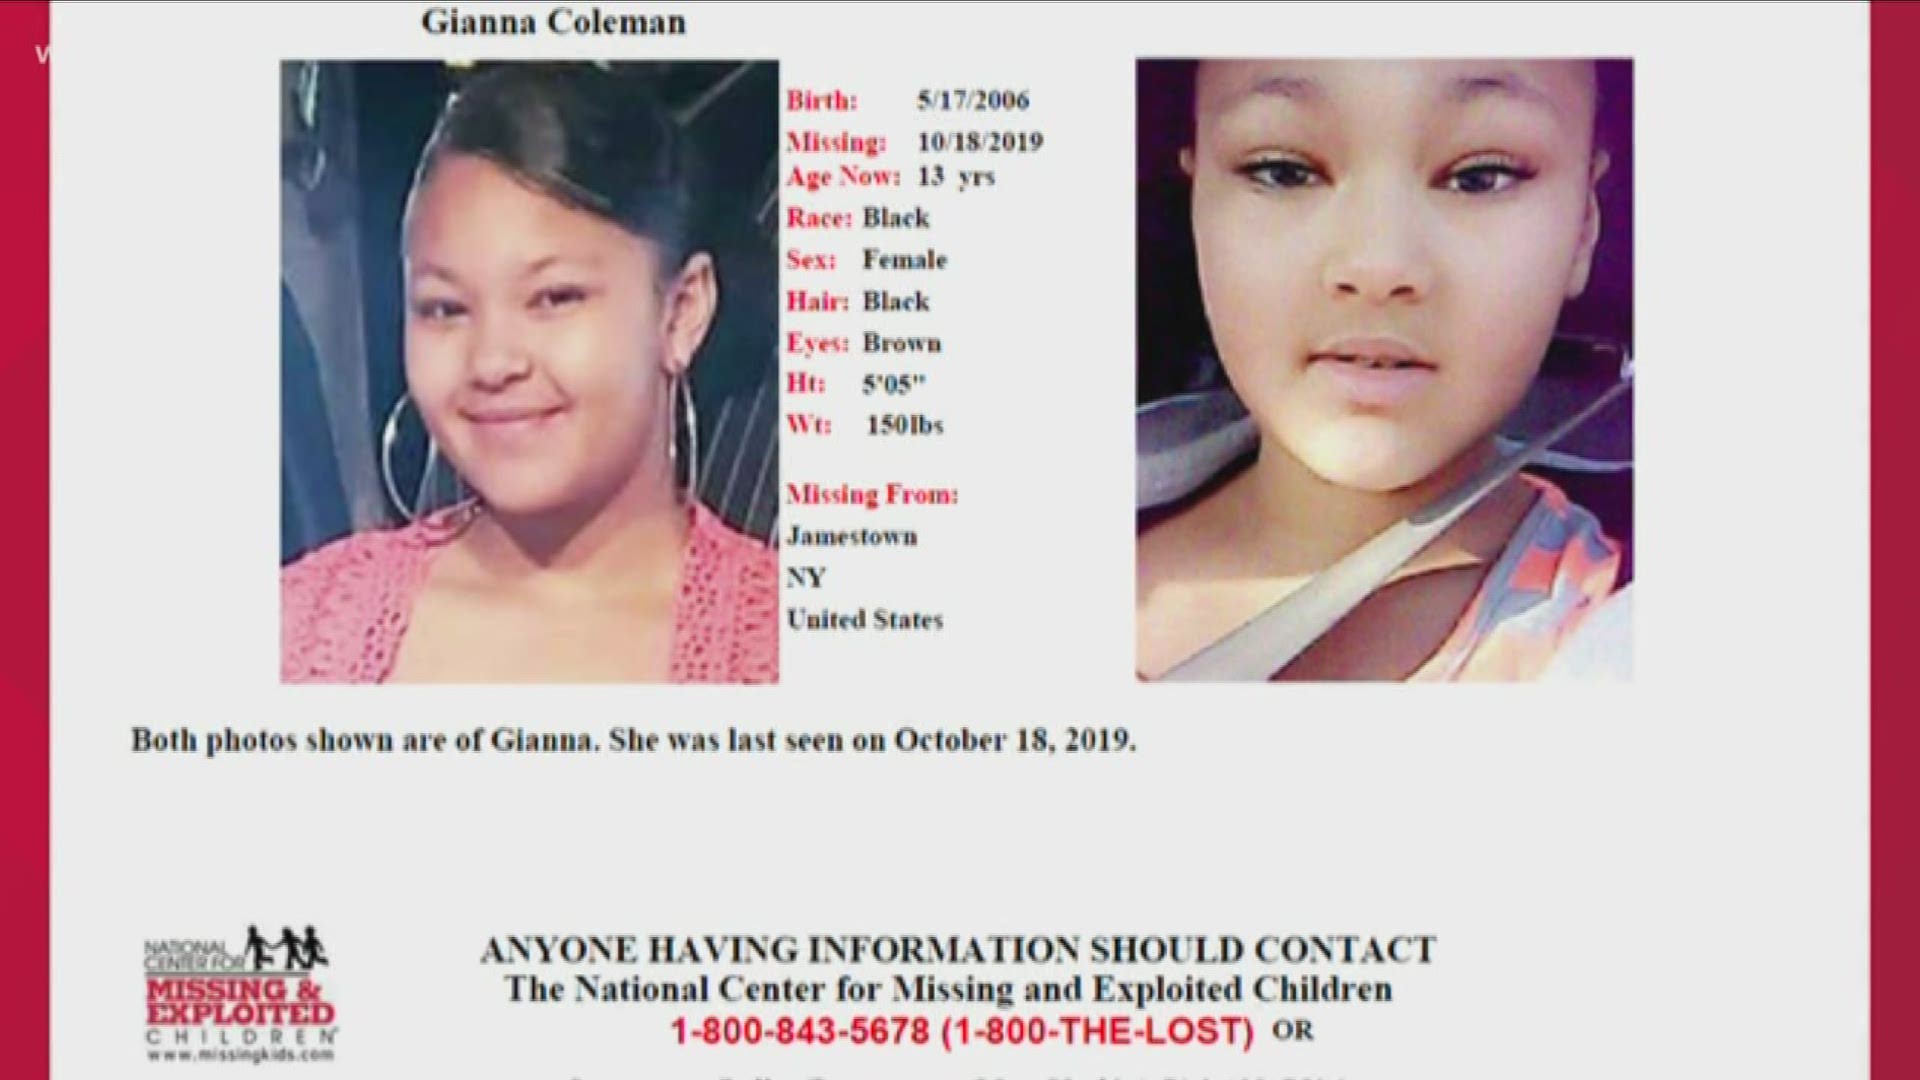 13 year old Gianna Coleman has been missing since October 21st. She is 5 foot 5 inches, and weighs about 150 pounds. She has black hair and brown eyes.